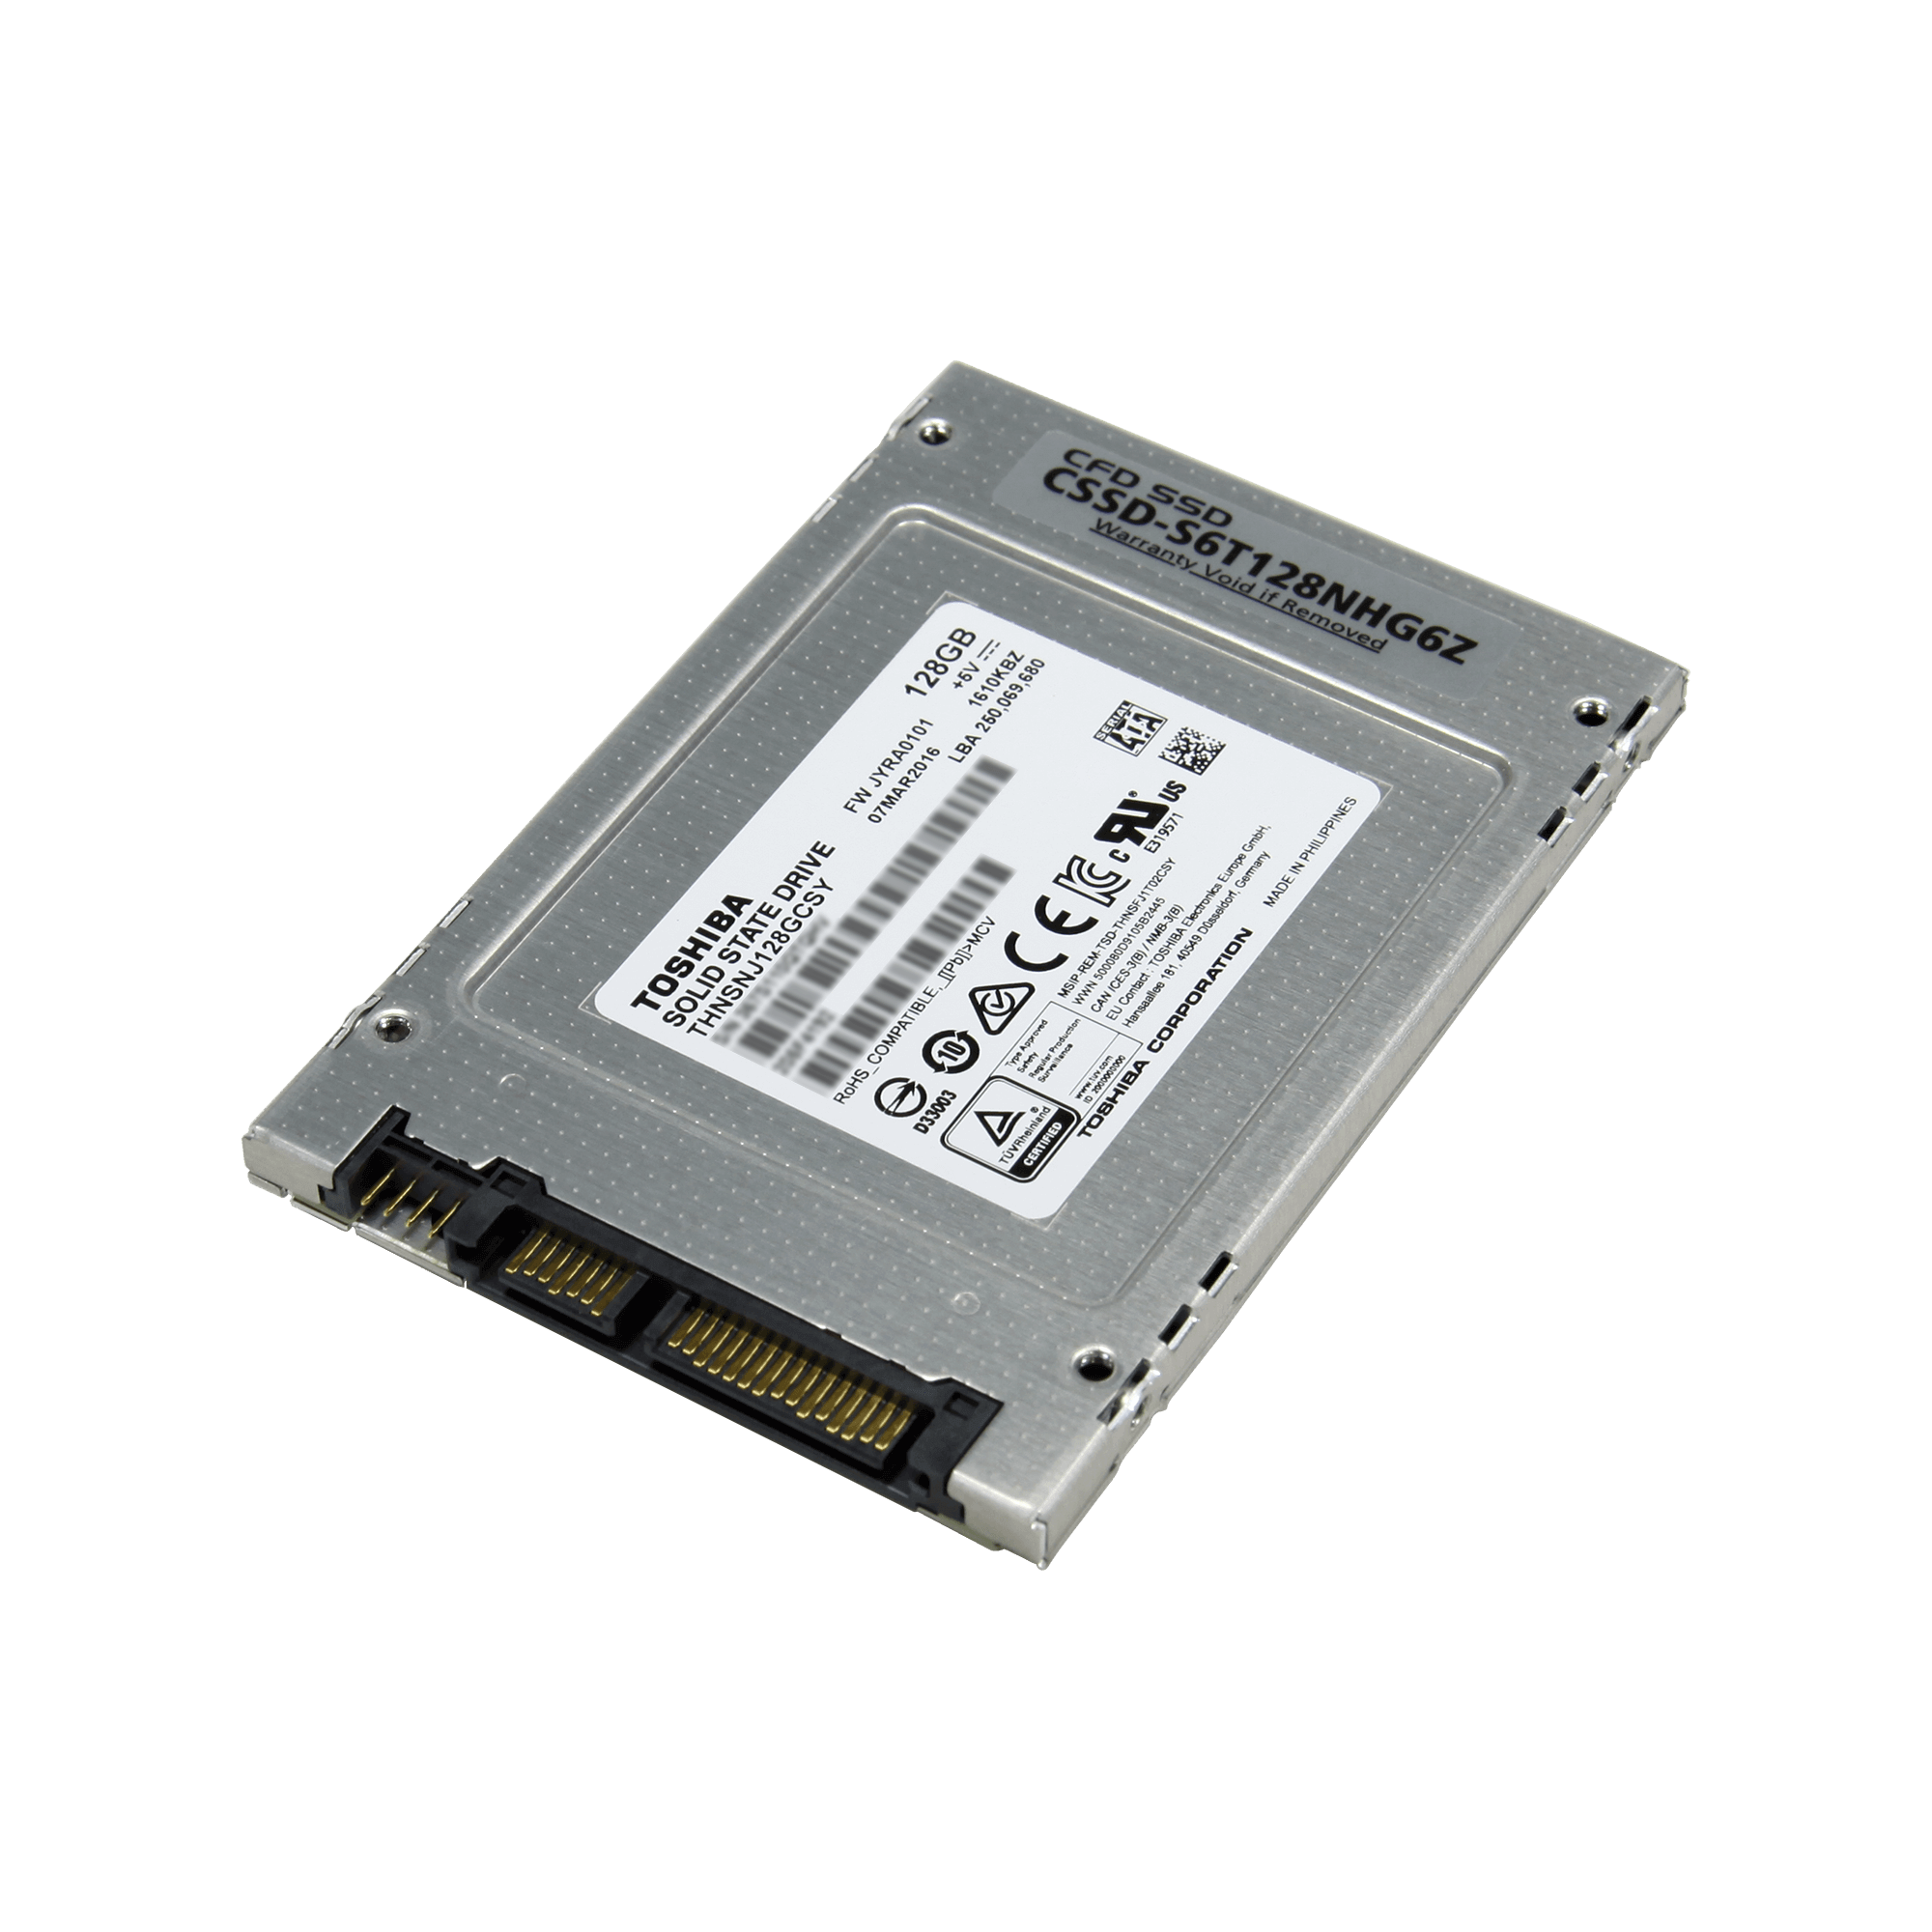 CSSD-S6T128NHG6Z | CFD Toshiba製SSD 採用 MLCモデル 128GB | CFD販売